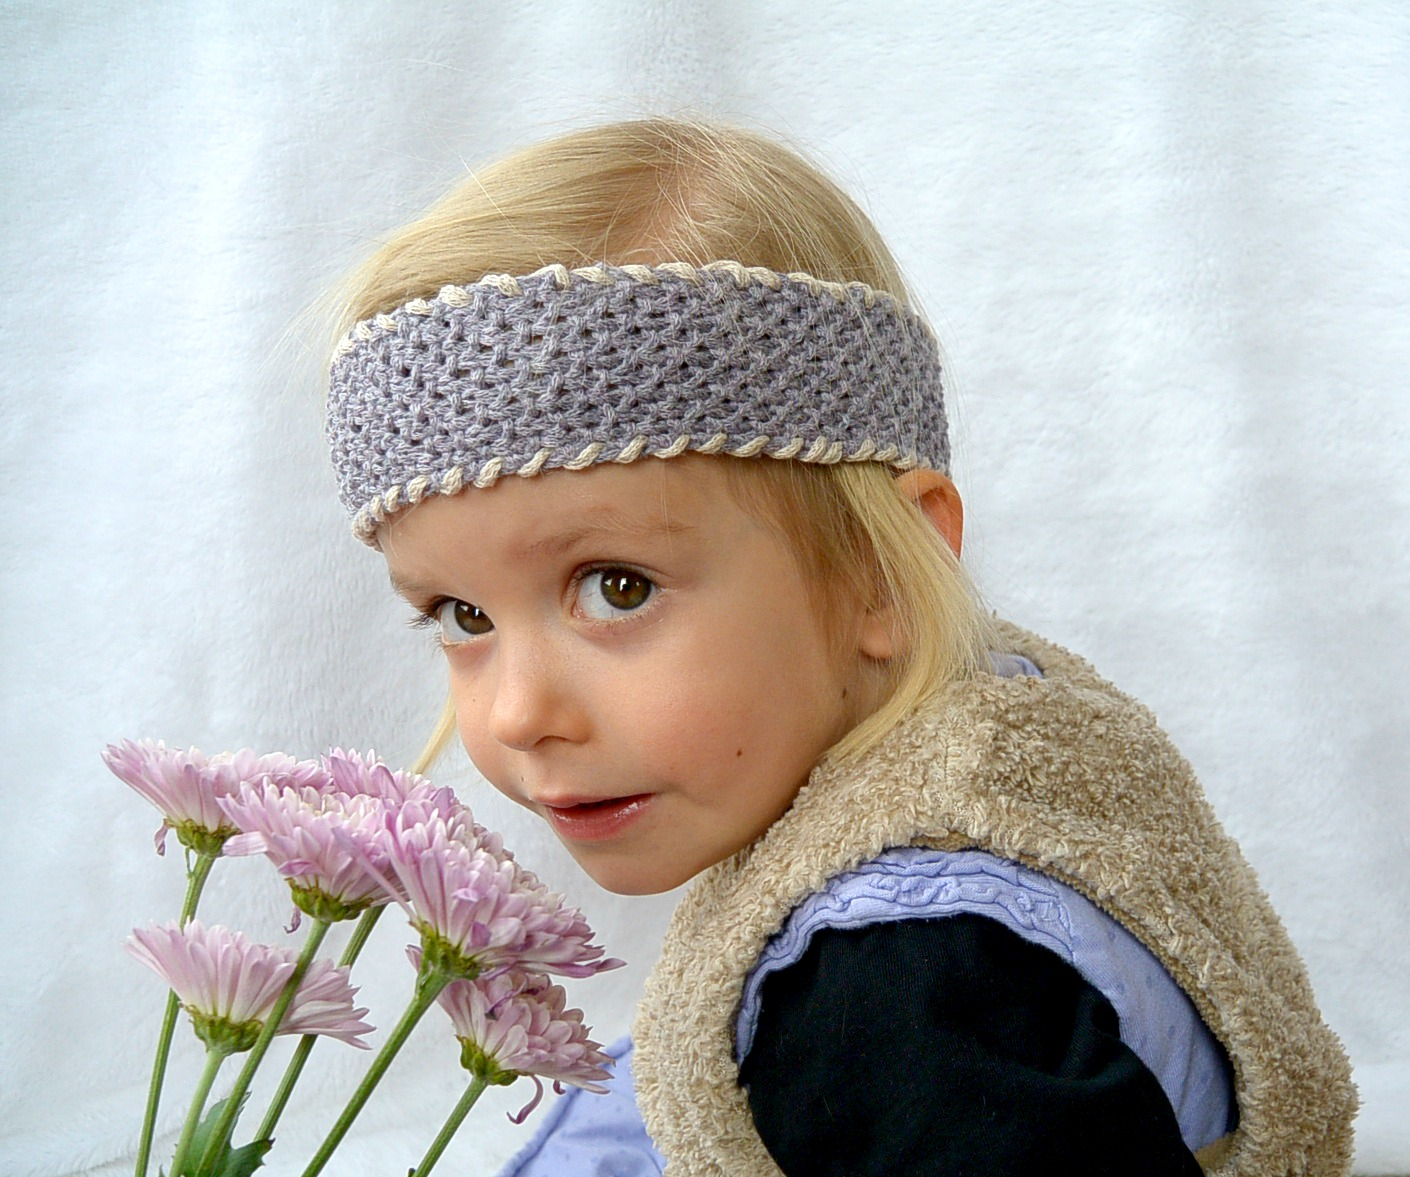 Knit Headband Pattern With Flower Easy Seed Stitch Headband Adult Or Child Mama In A Stitch